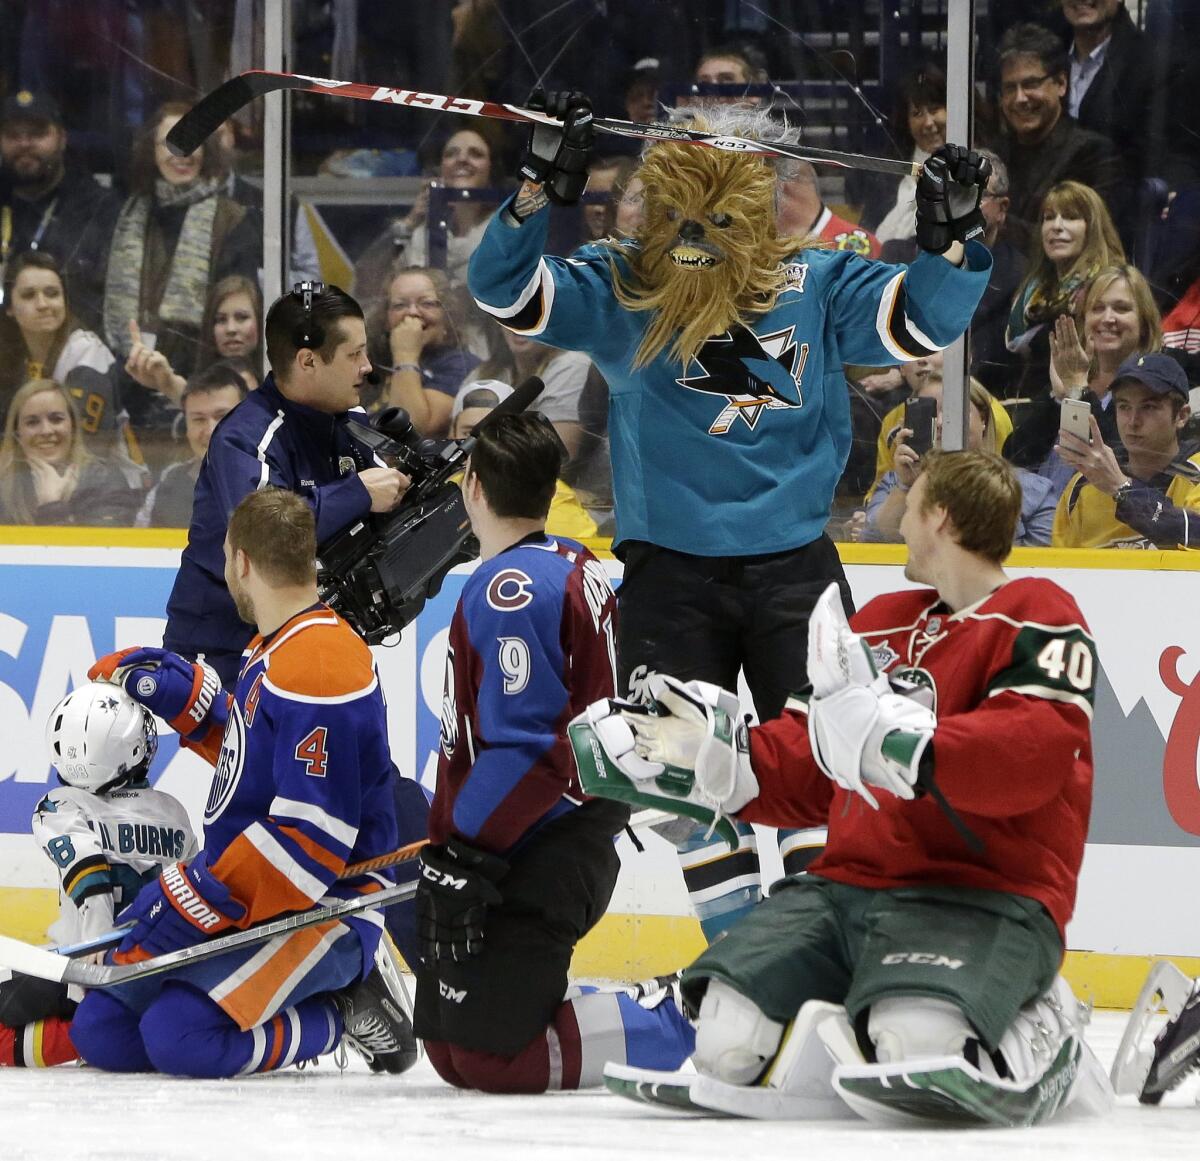 Sharks defenseman Brent Burns skates back to the bench wearing a Chewbacca mask after competing in the breakaway challenge at the NHL All-Star game skills competition.